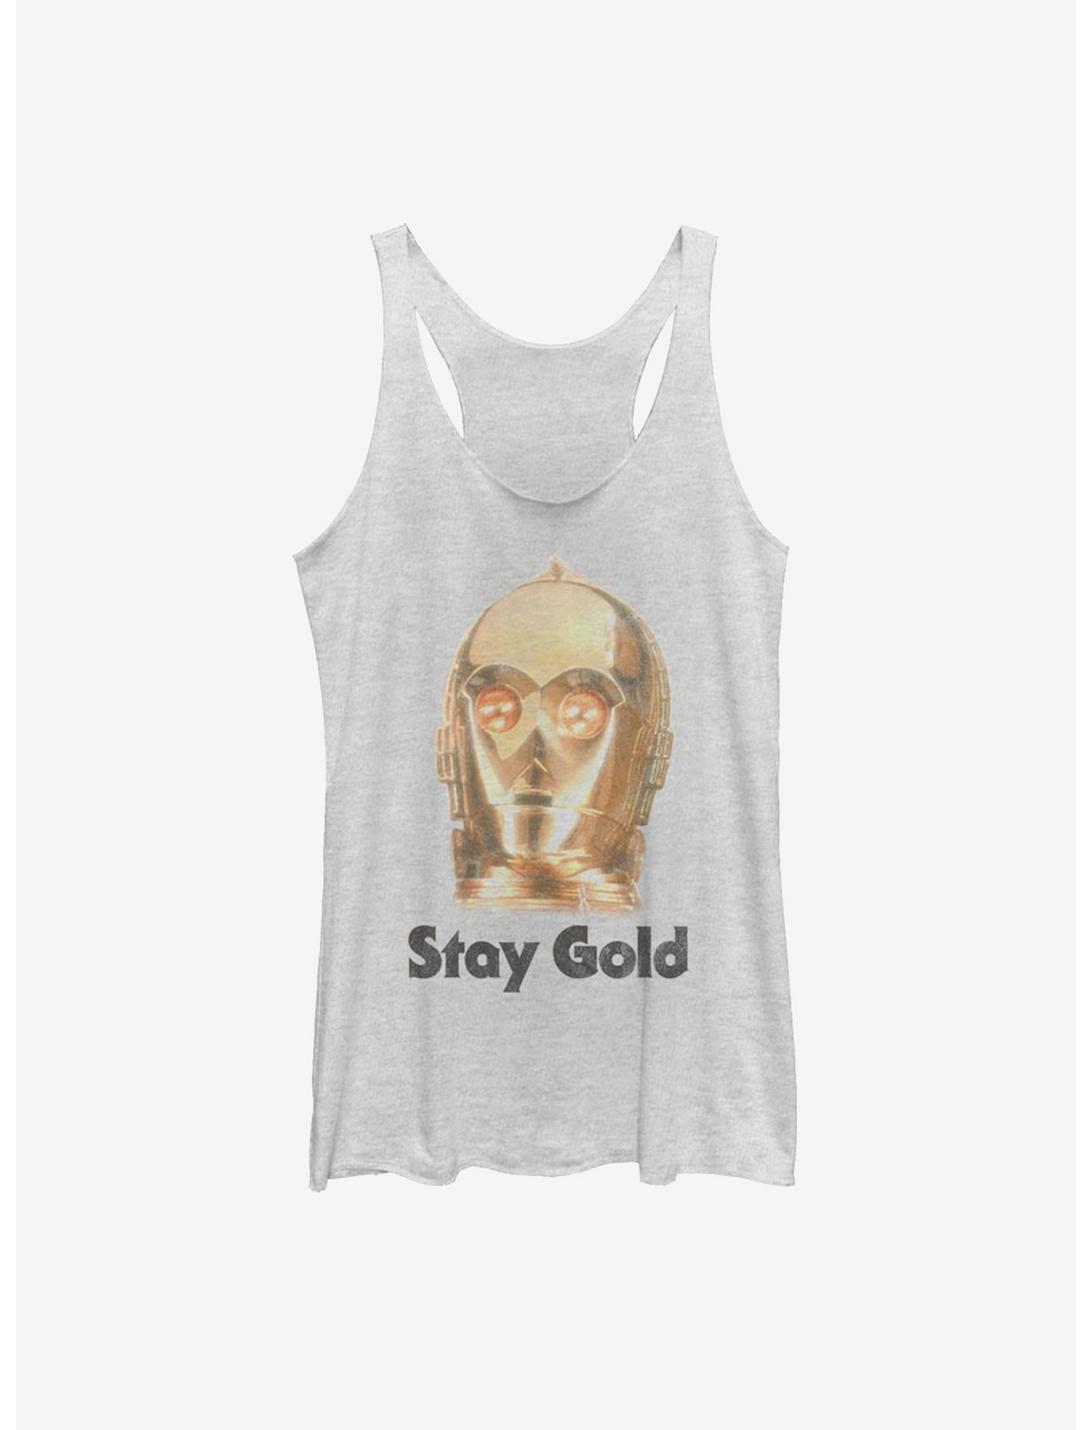 Star Wars Episode IX The Rise Of Skywalker Stay Gold Womens Tank Top, WHITE HTR, hi-res